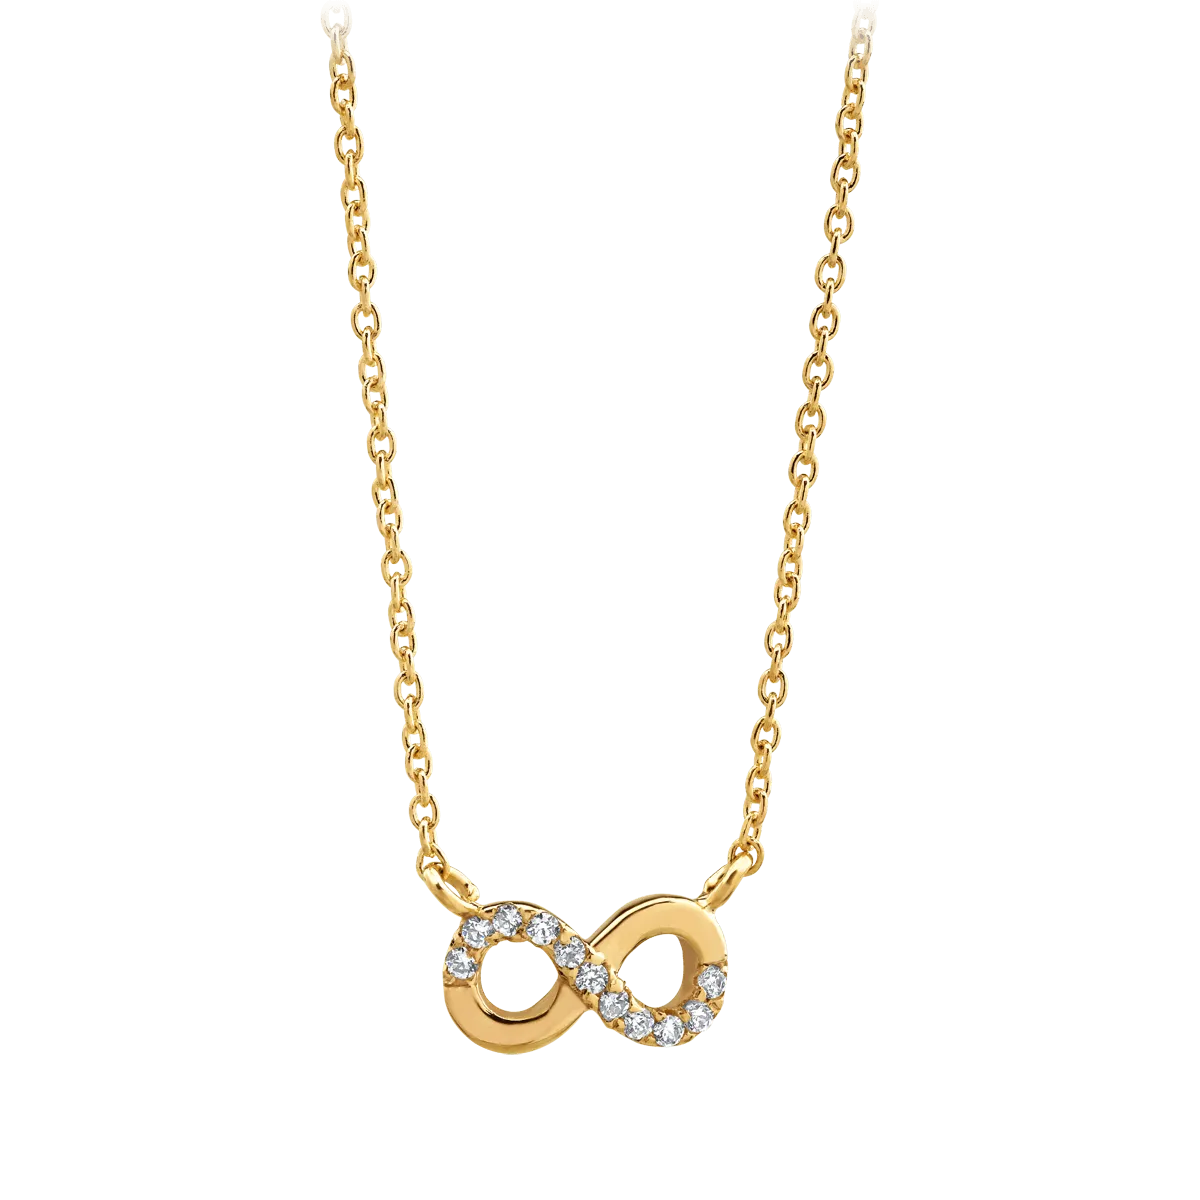 14K yellow gold infinity pendant necklace